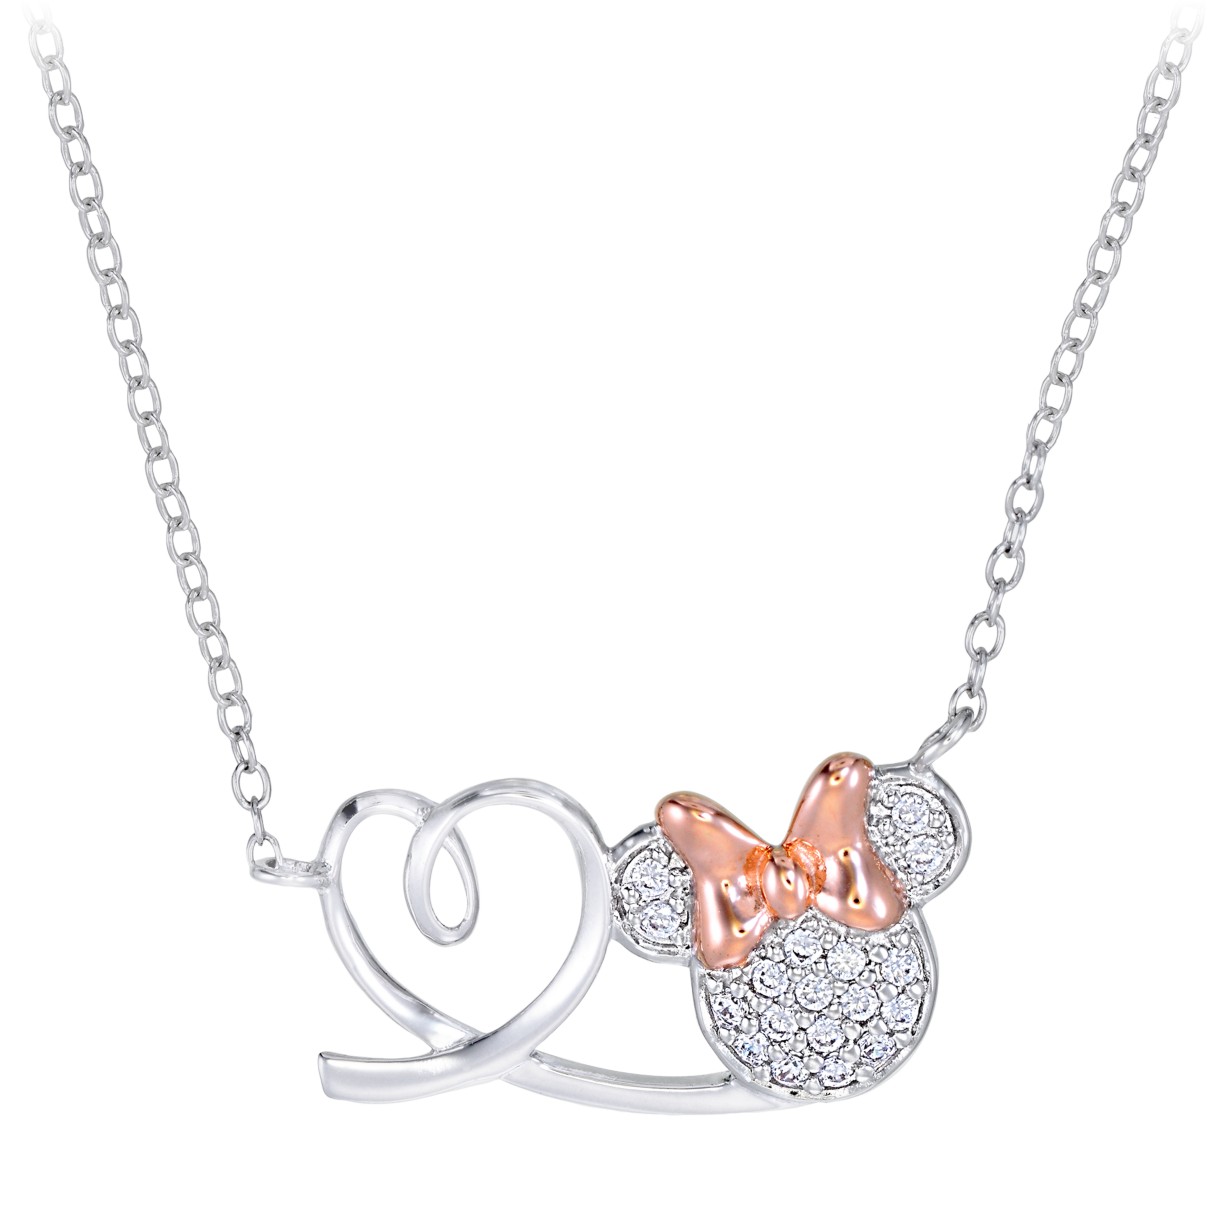 Minnie Mouse and Heart Necklace